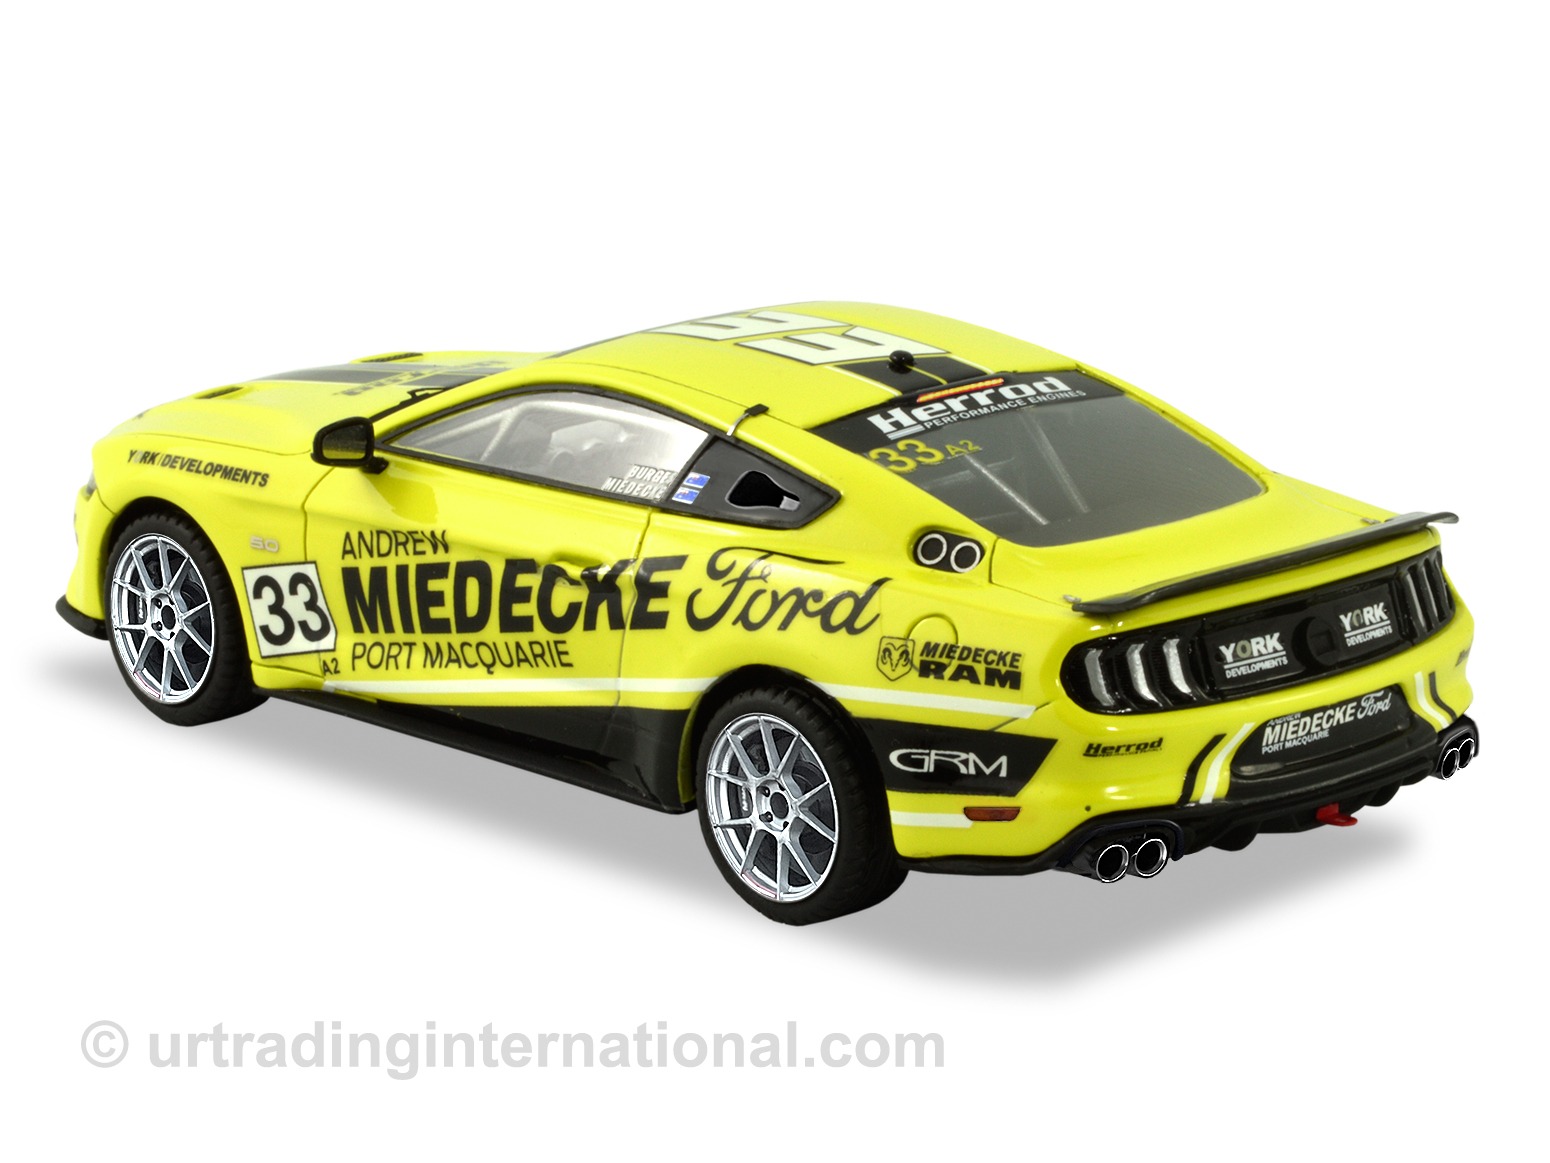 2021 Ford Mustang Racing Car – George Miedecke